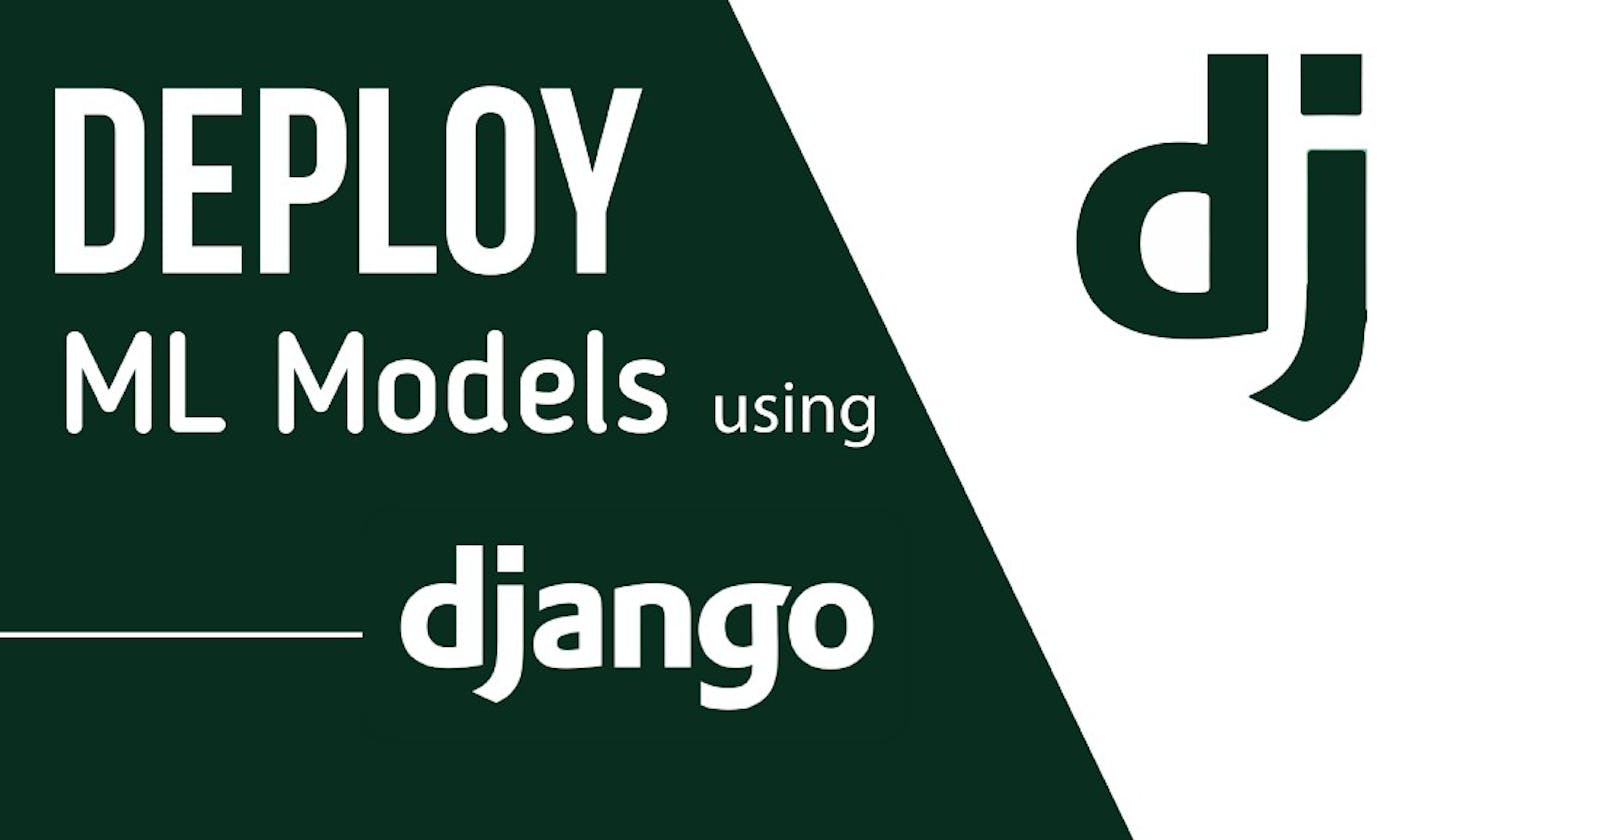 Deploy a machine learning model using Django (the easy way).